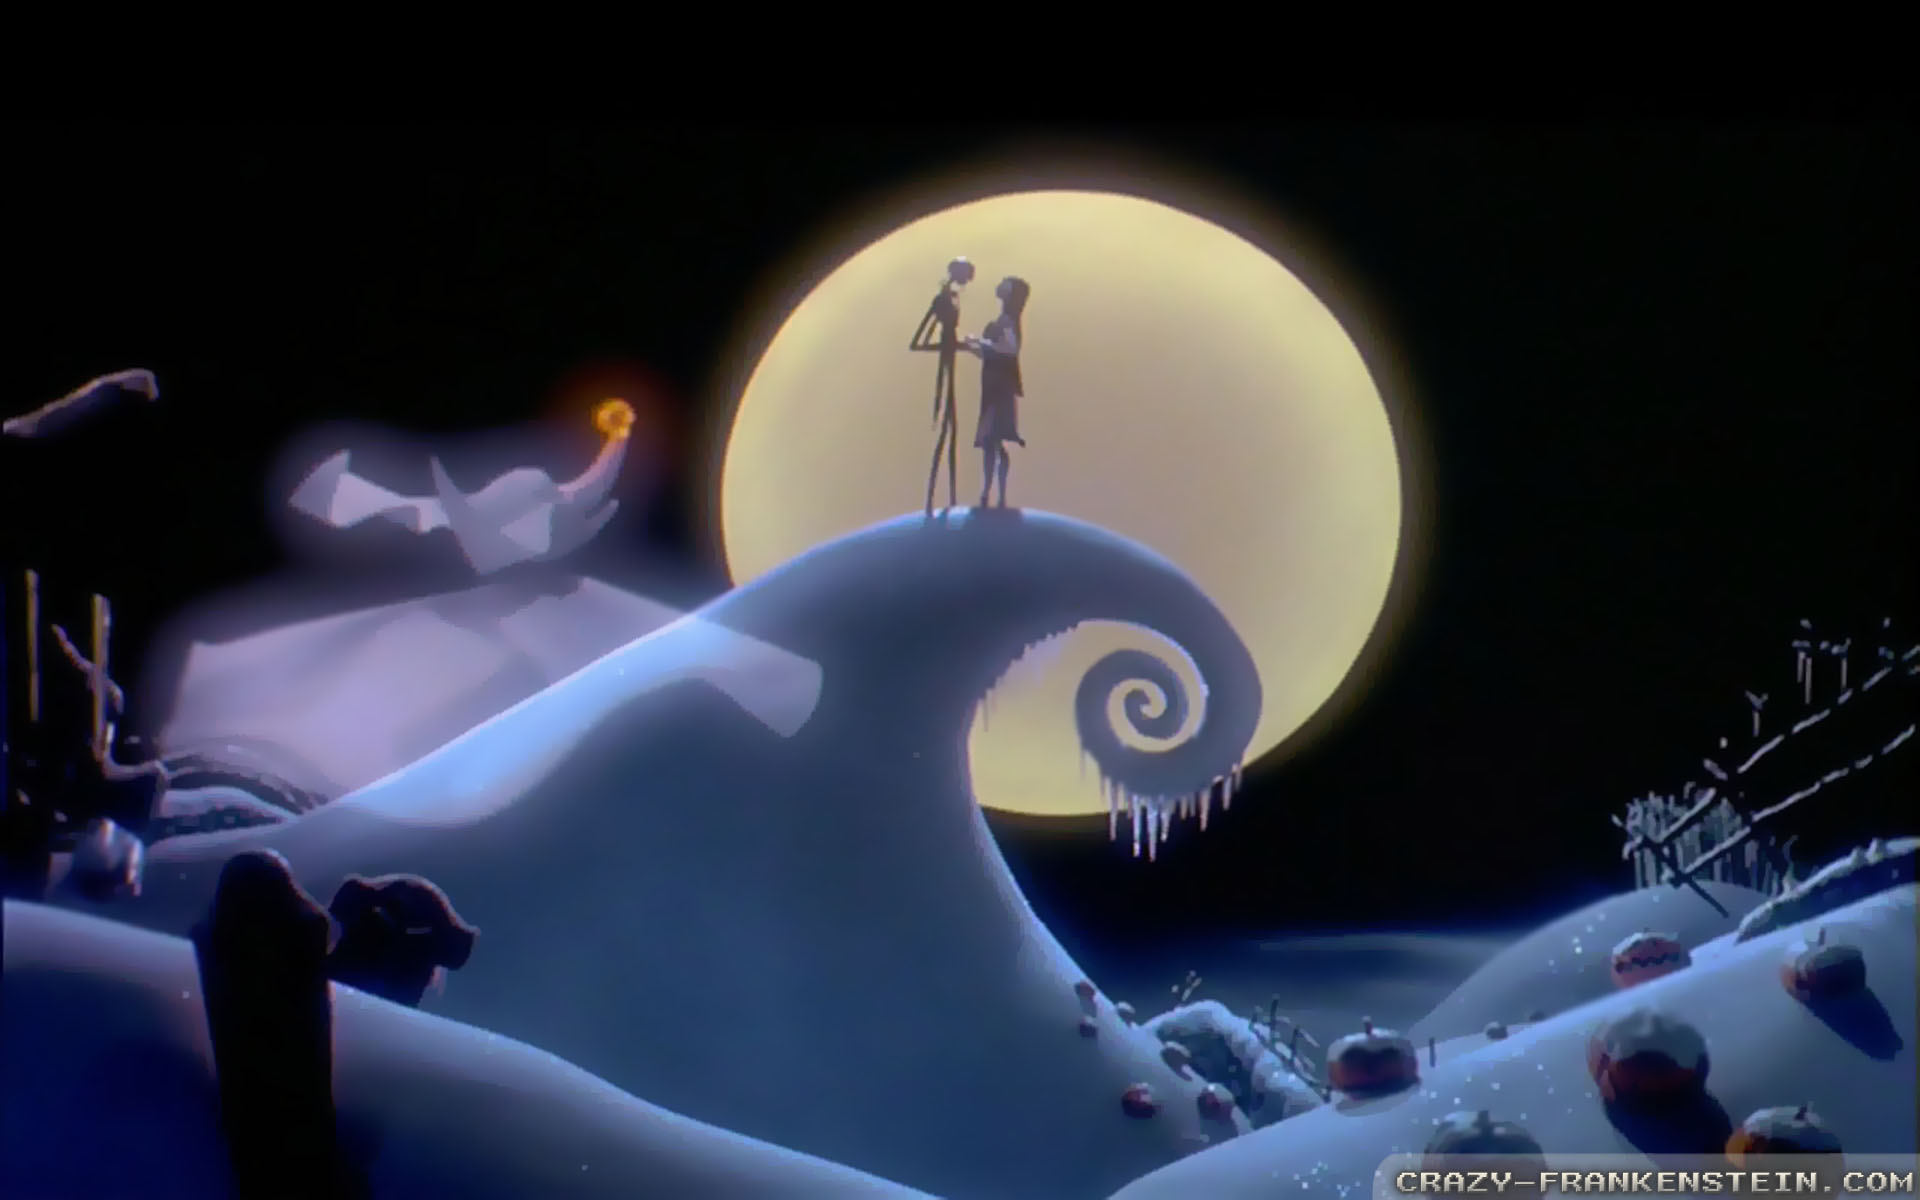 nightmare before christmas wallpaper,atmosphere,design,animation,space,illustration